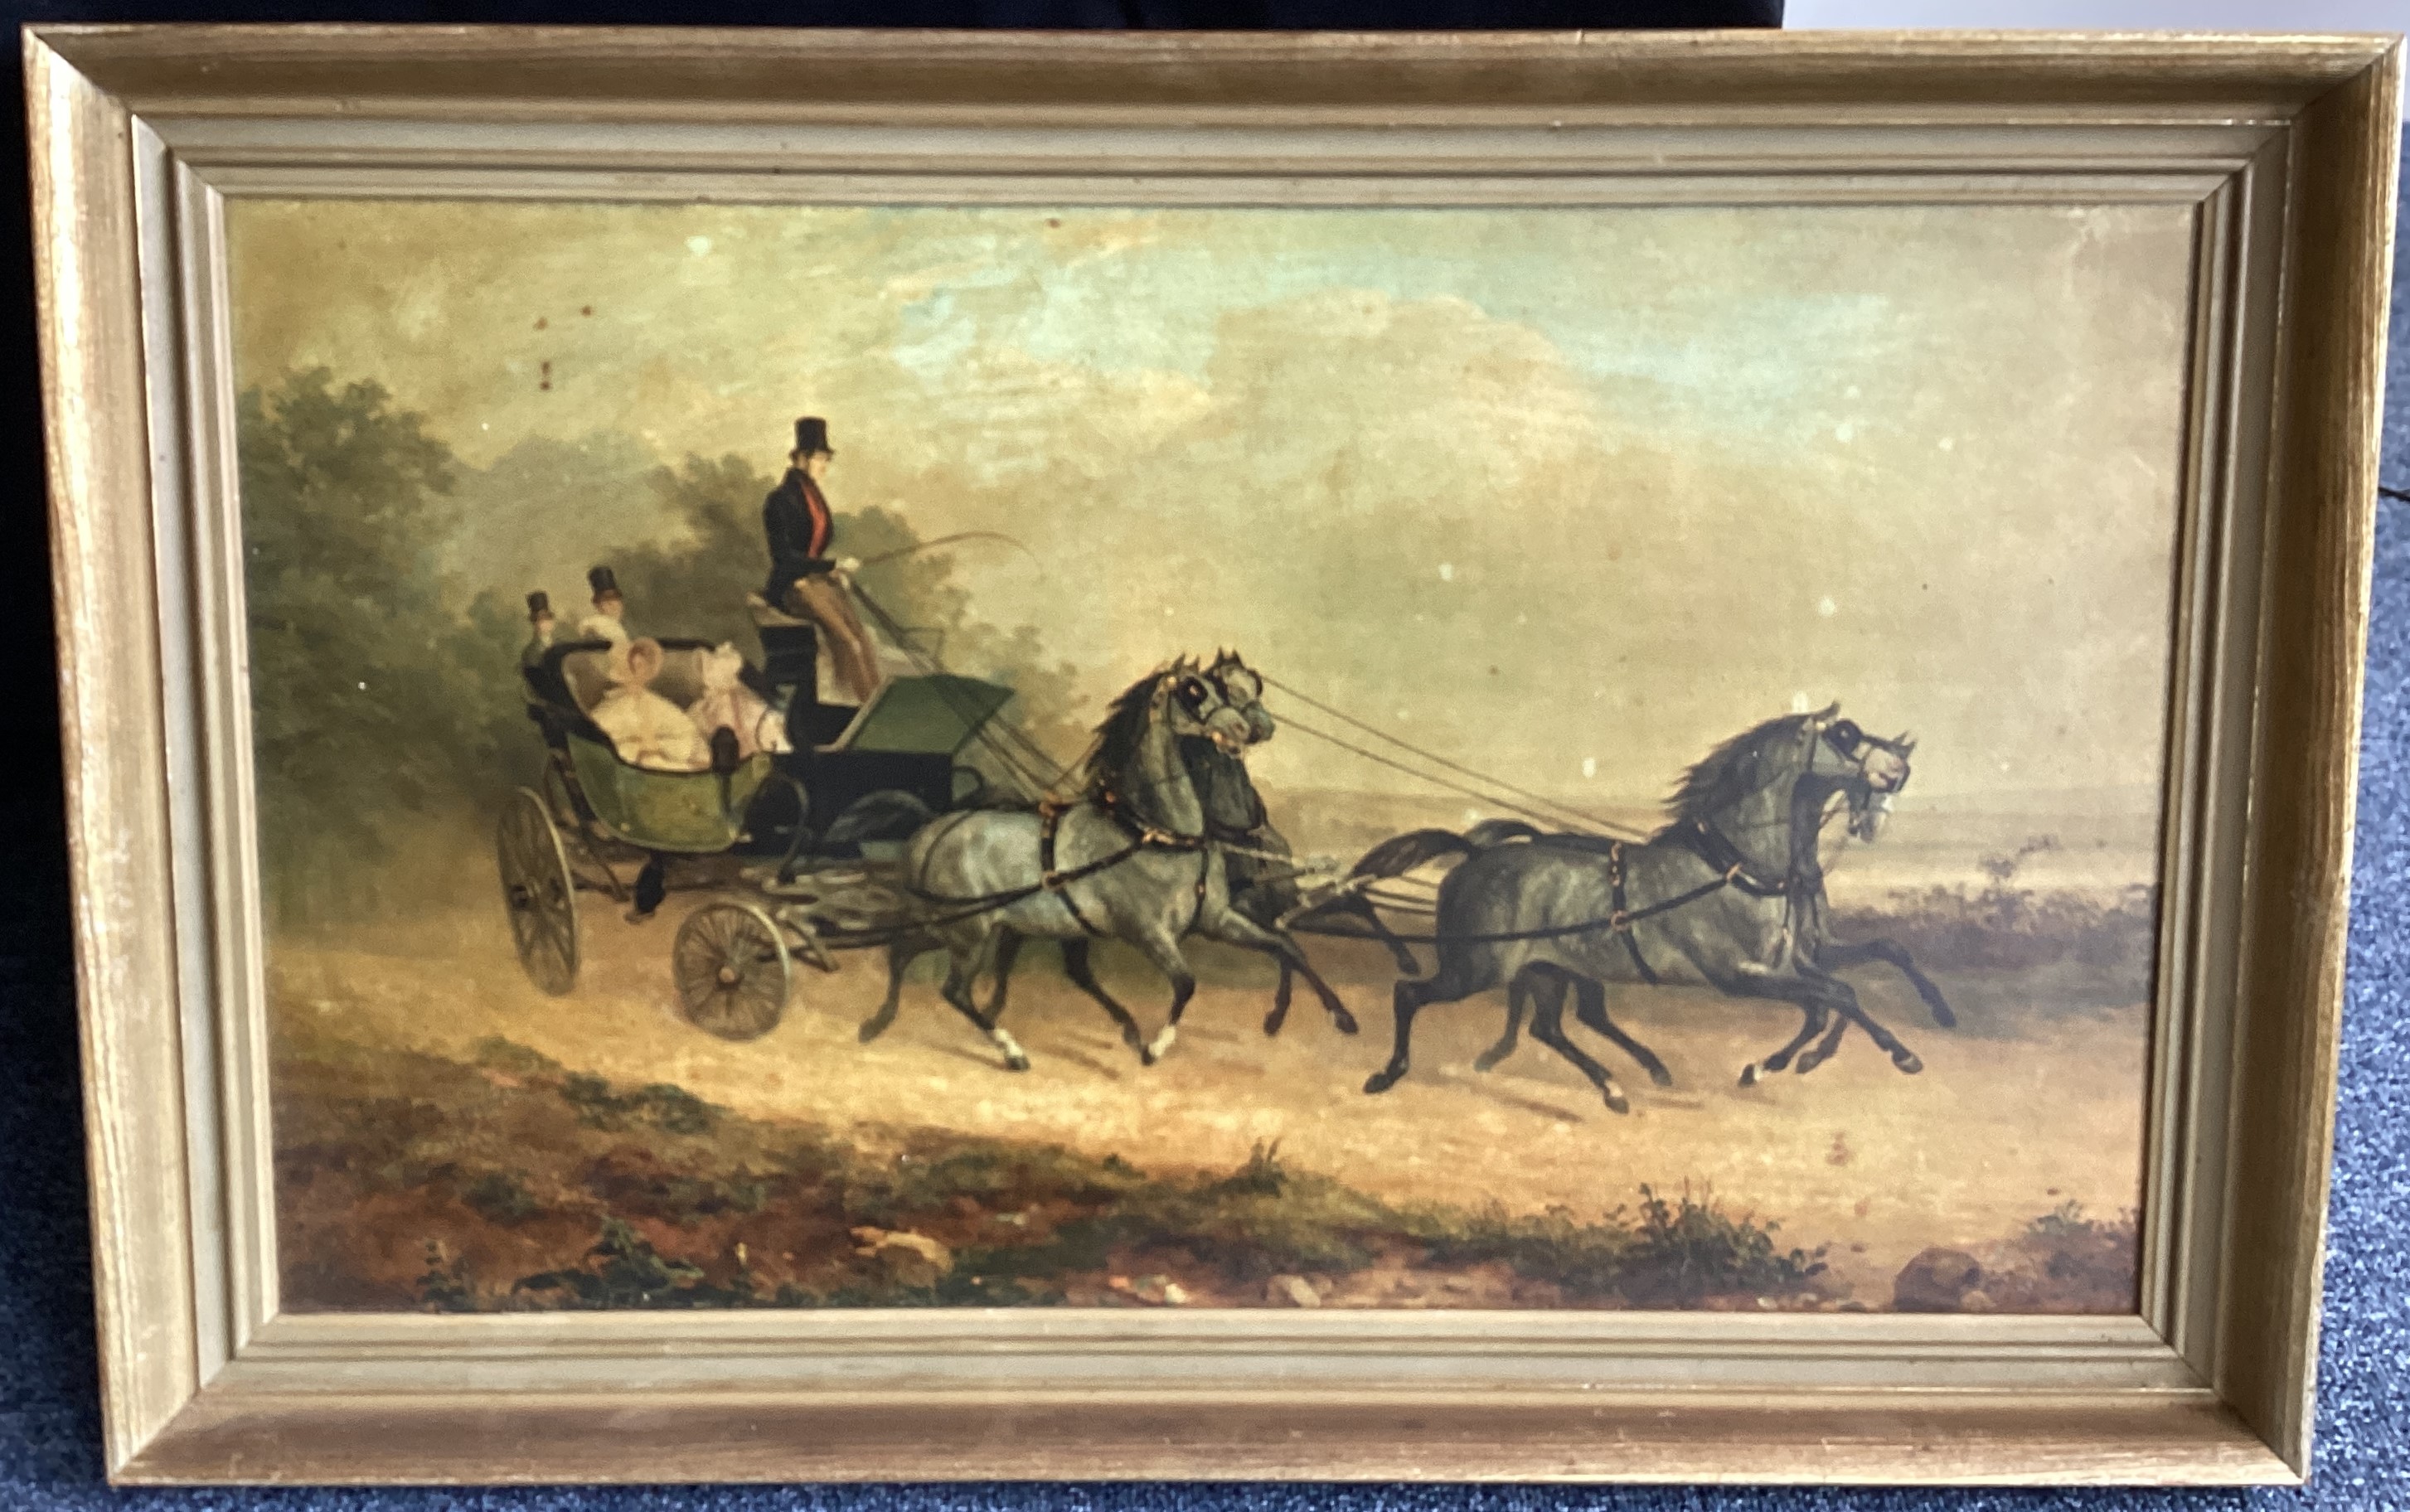 A framed picture depicting horses and carriage.